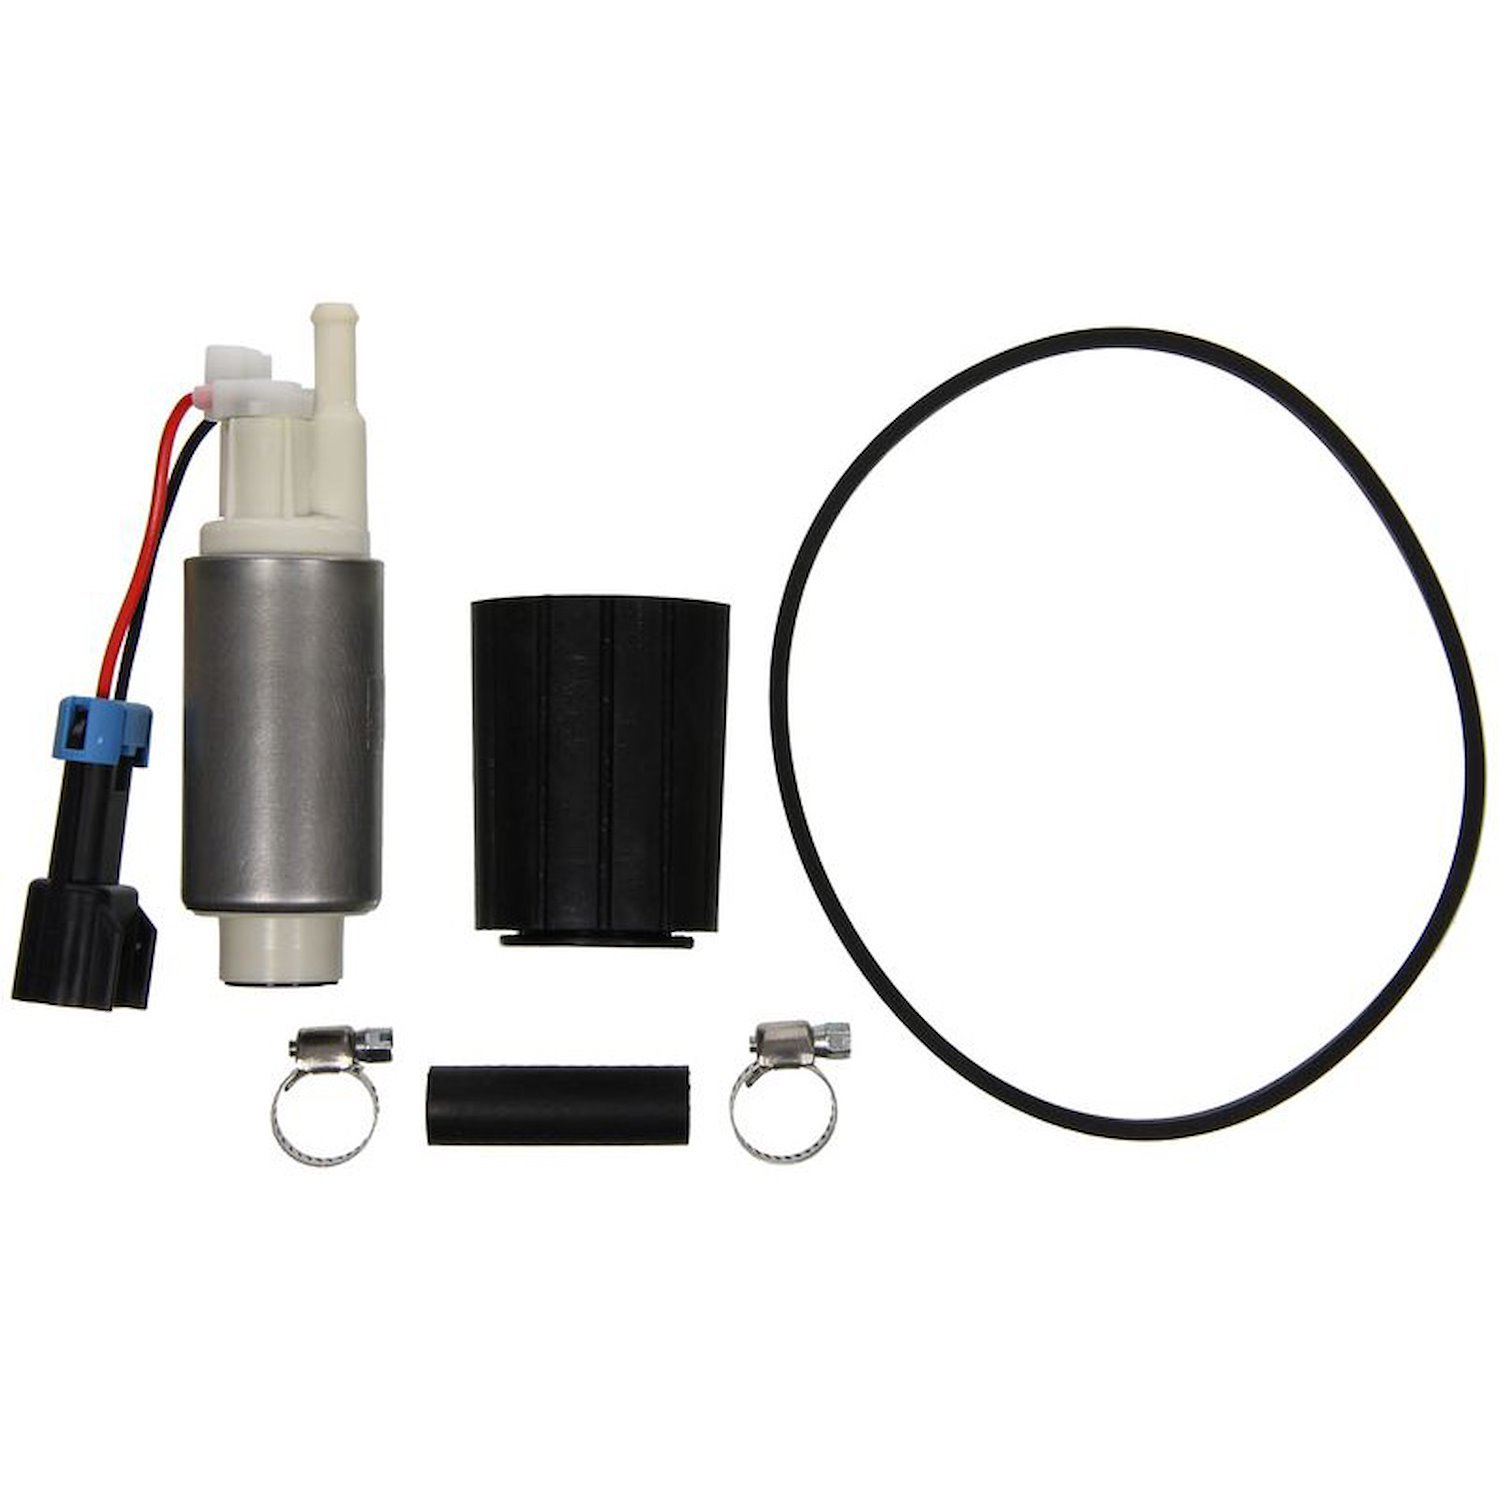 EFI In-Tank Electric Fuel Pump for 1999-2004 Ford Ranger/1999-2000 Mazda B3000